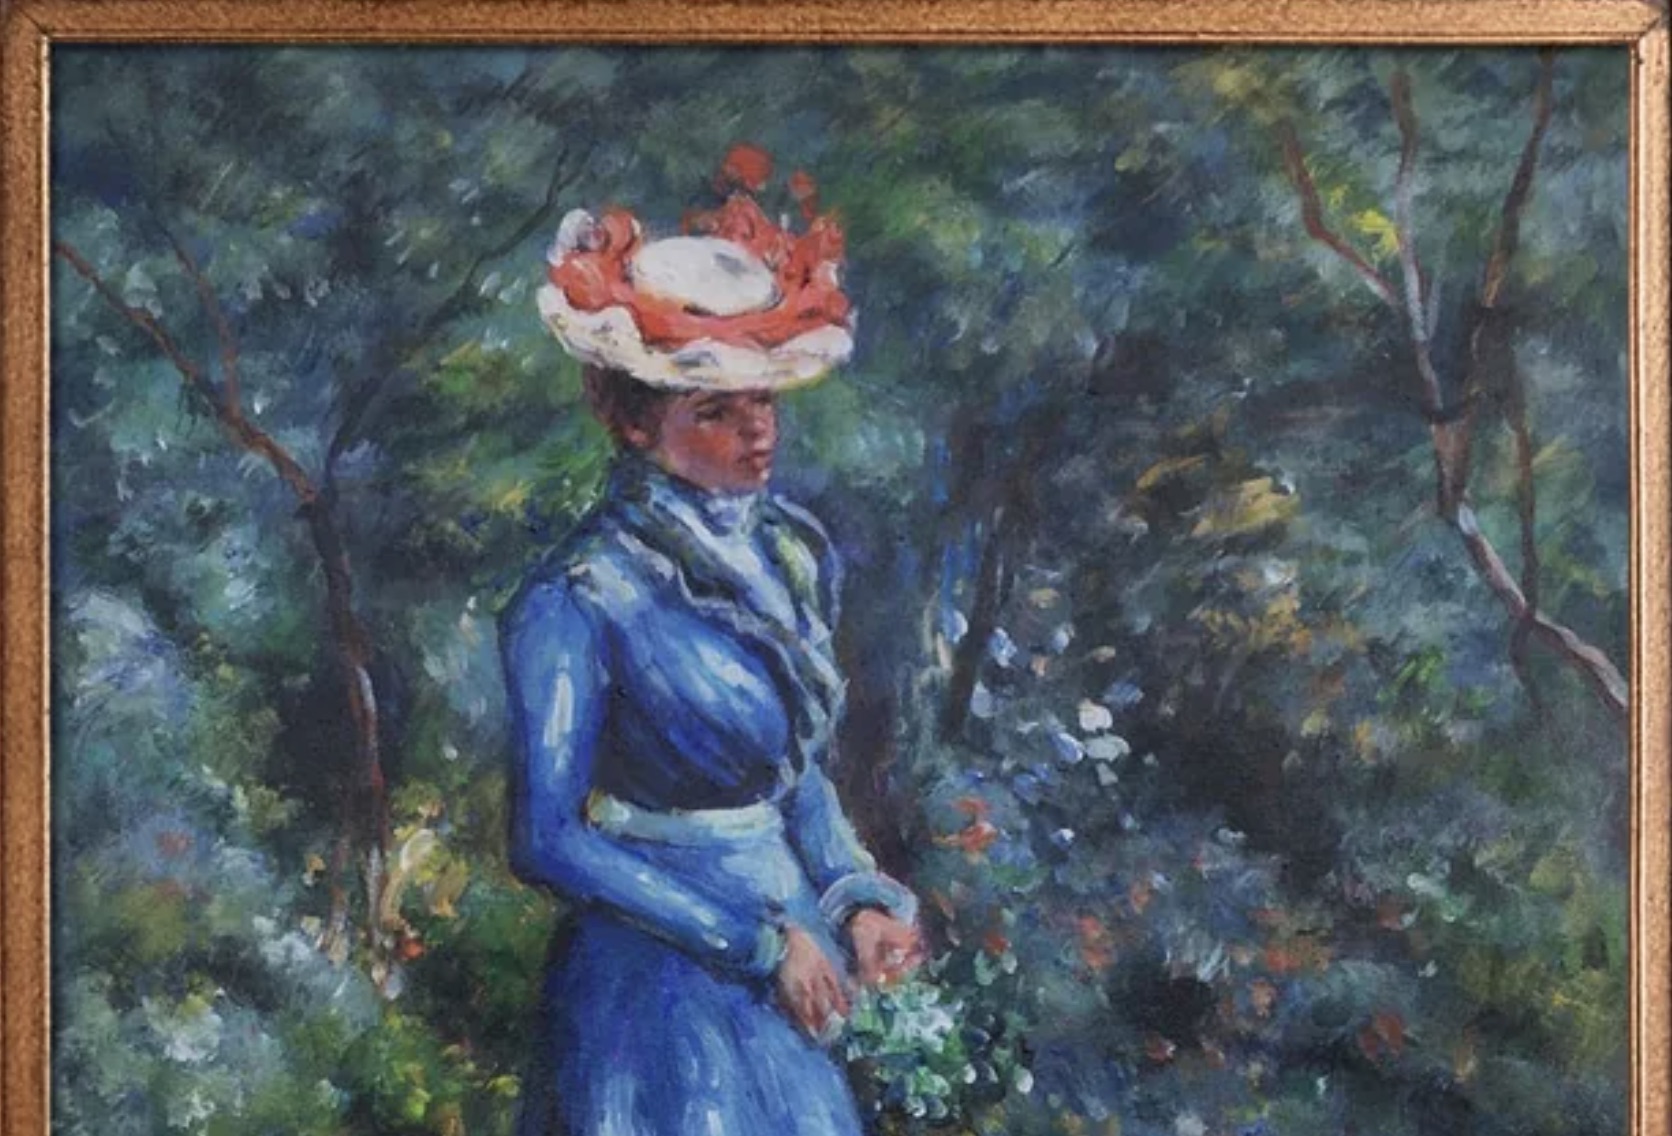 Pierre Auguste Renoir "Woman in a Blue Dress, Standing in the Garden of St. Cloud" Oil Painting, - Image 3 of 4